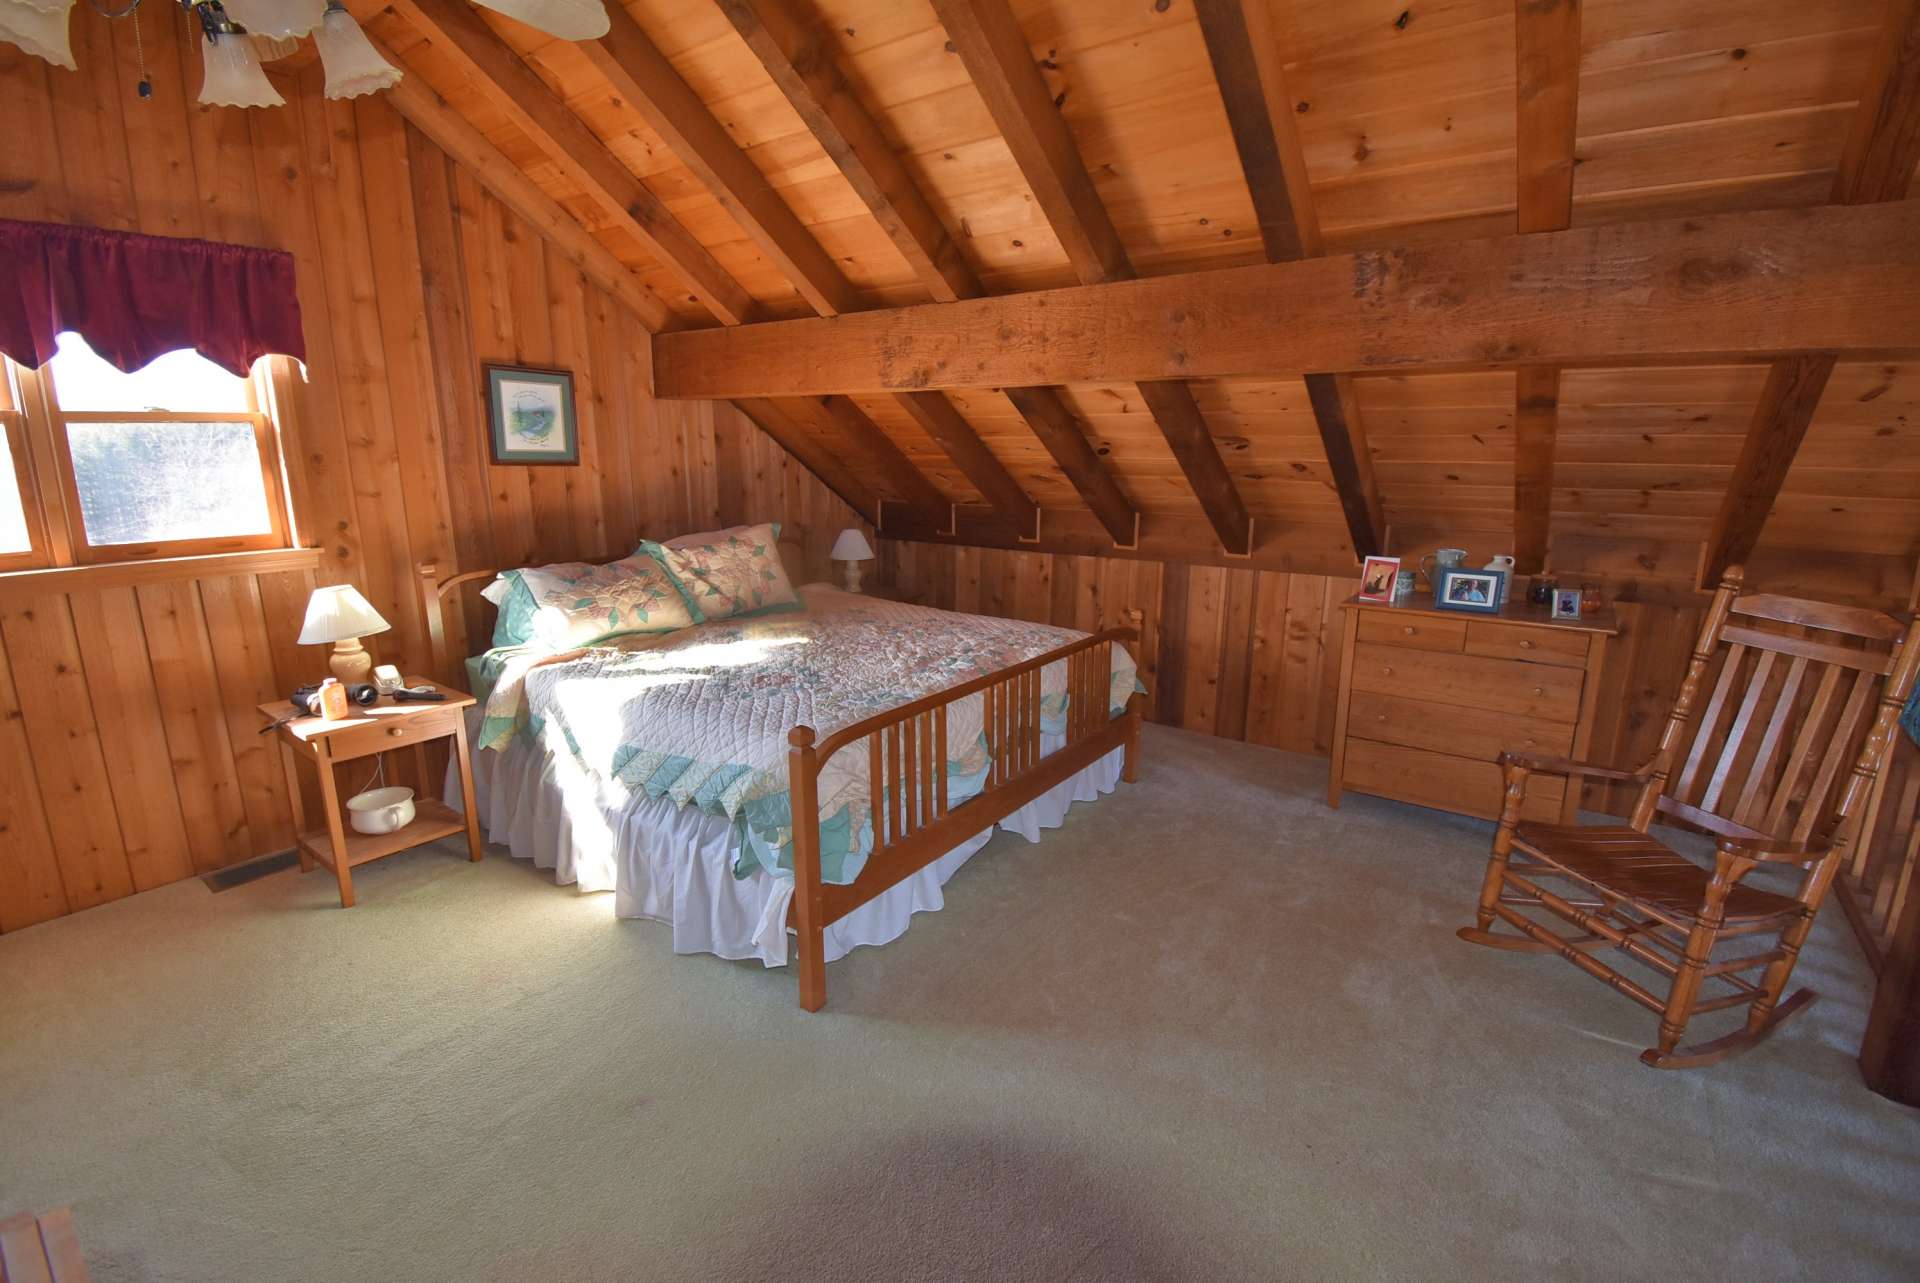 The upper level offers an open loft area overlooking the great room and is home to the second bedroom space.